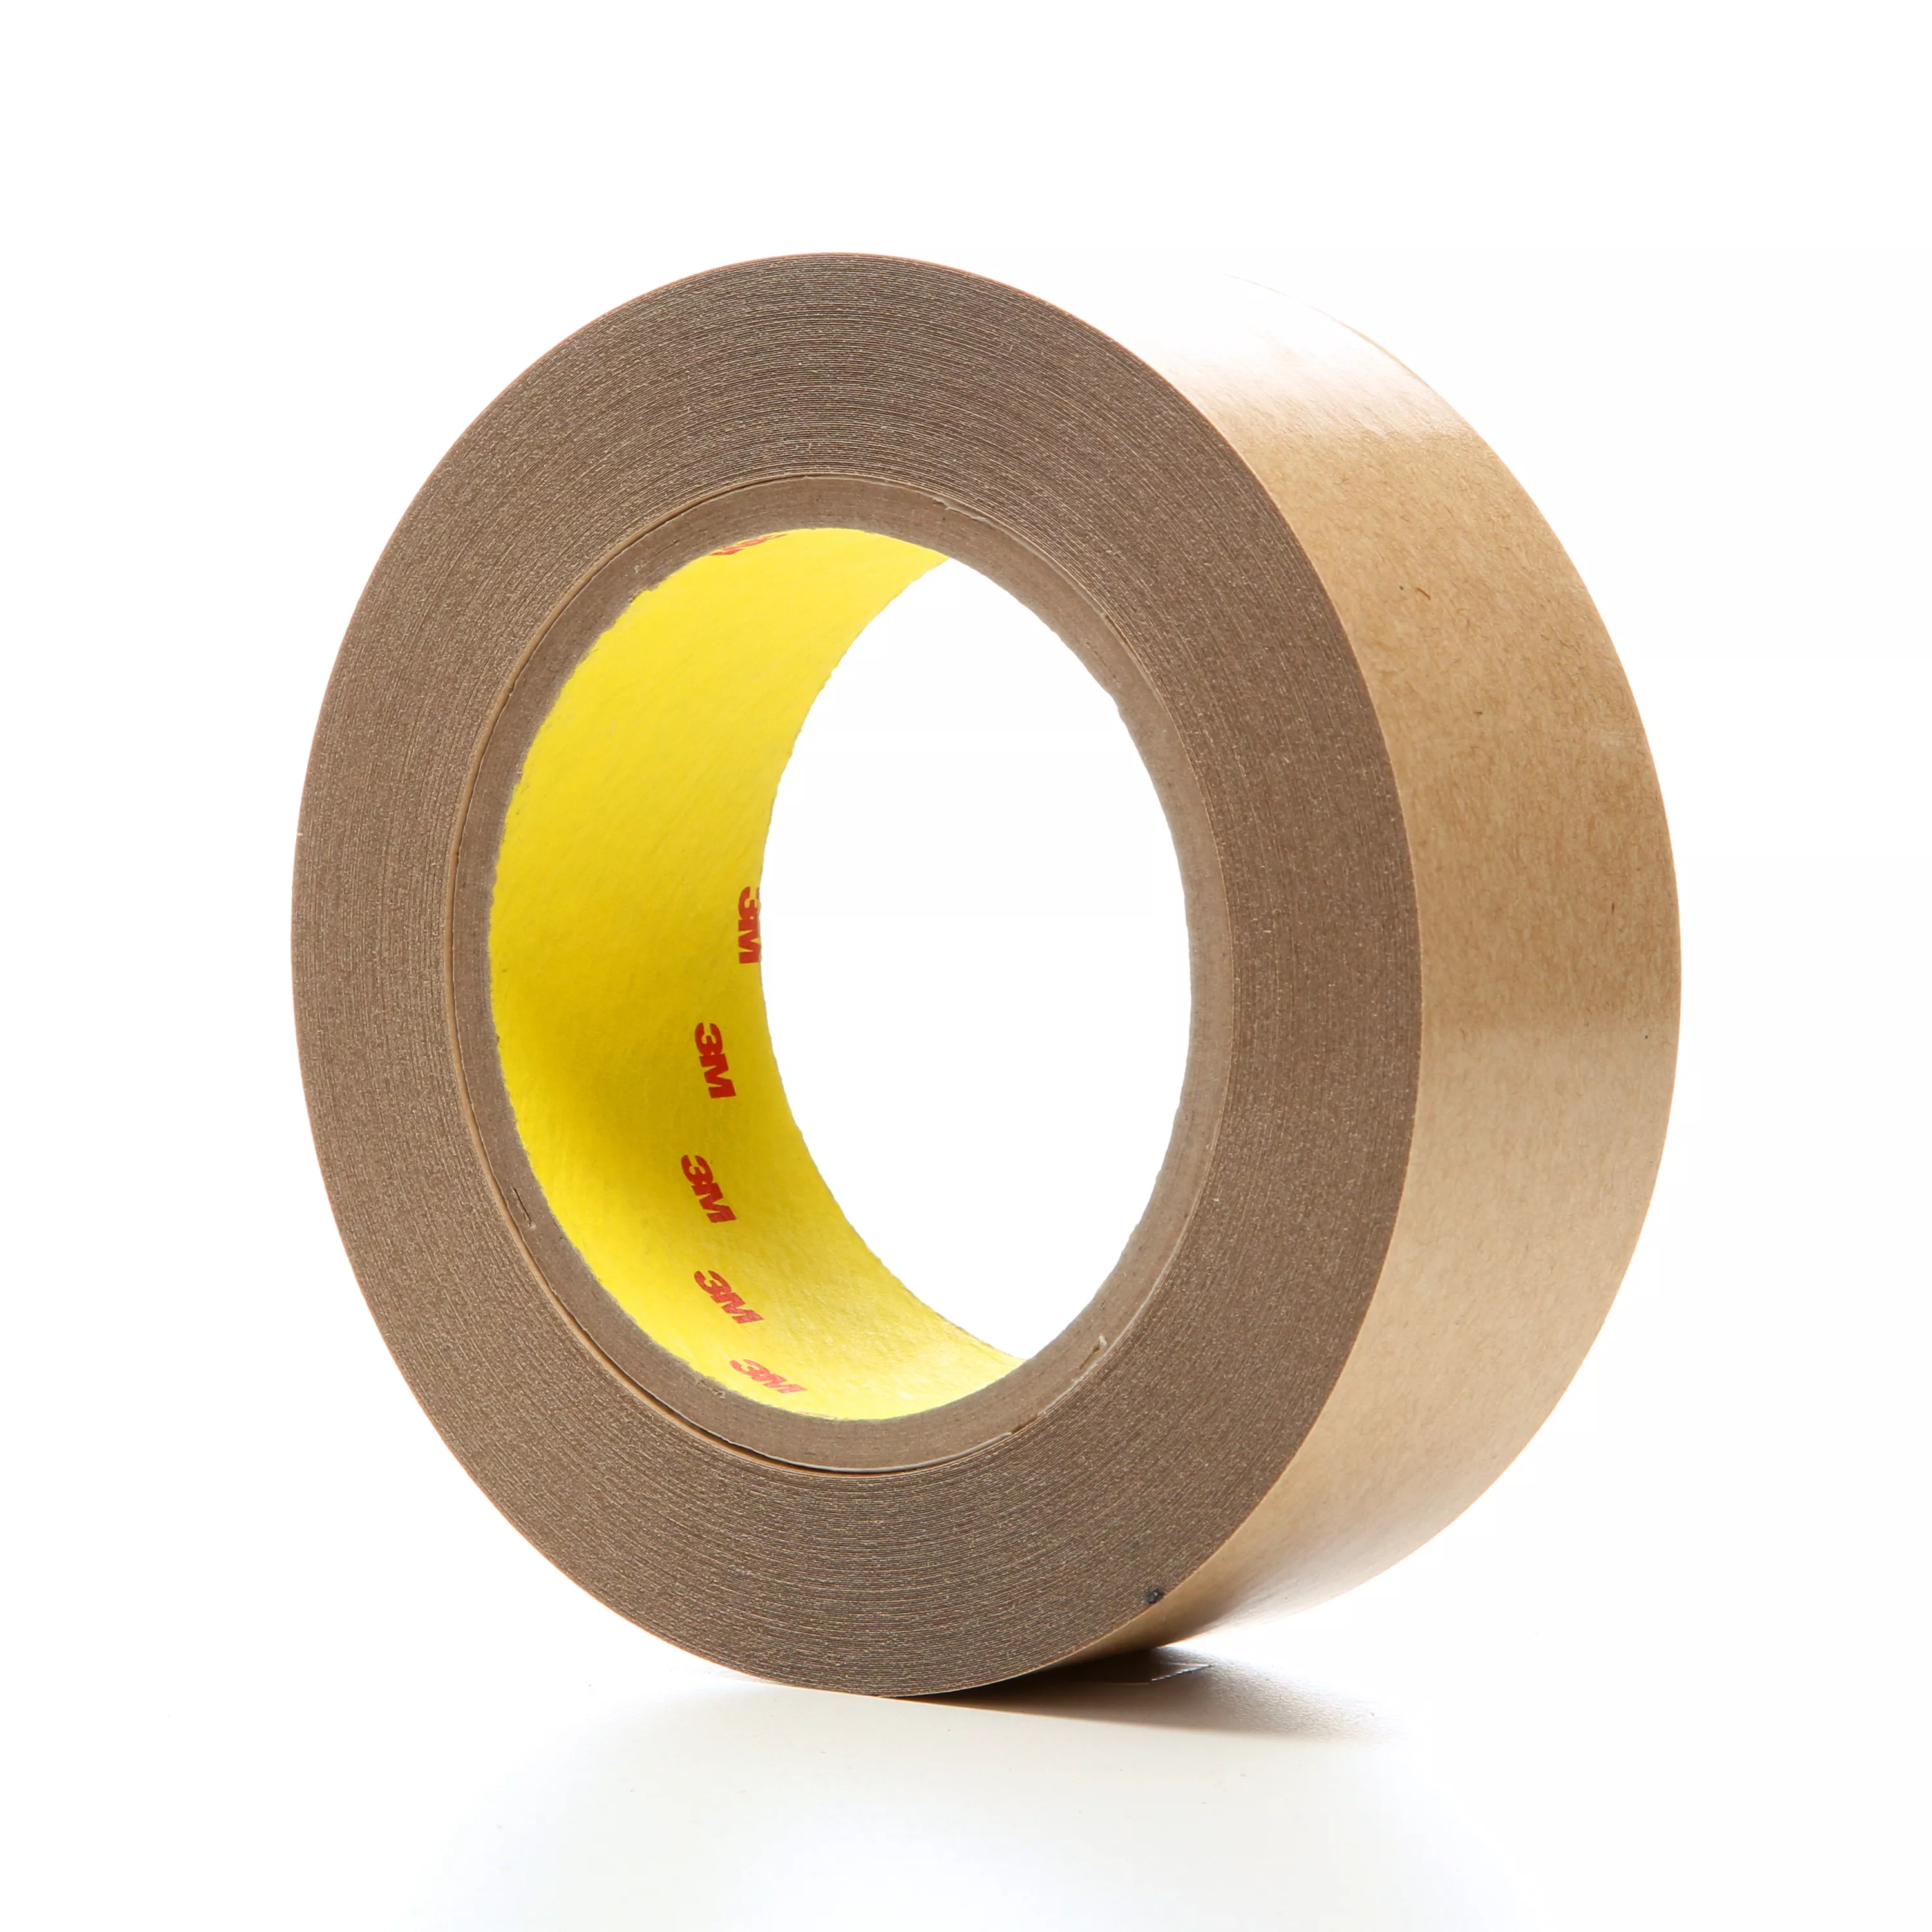 3M™ Double Coated Tape 415, Clear, 1 1/2 in x 36 yd, 4 mil, 24
Rolls/Case